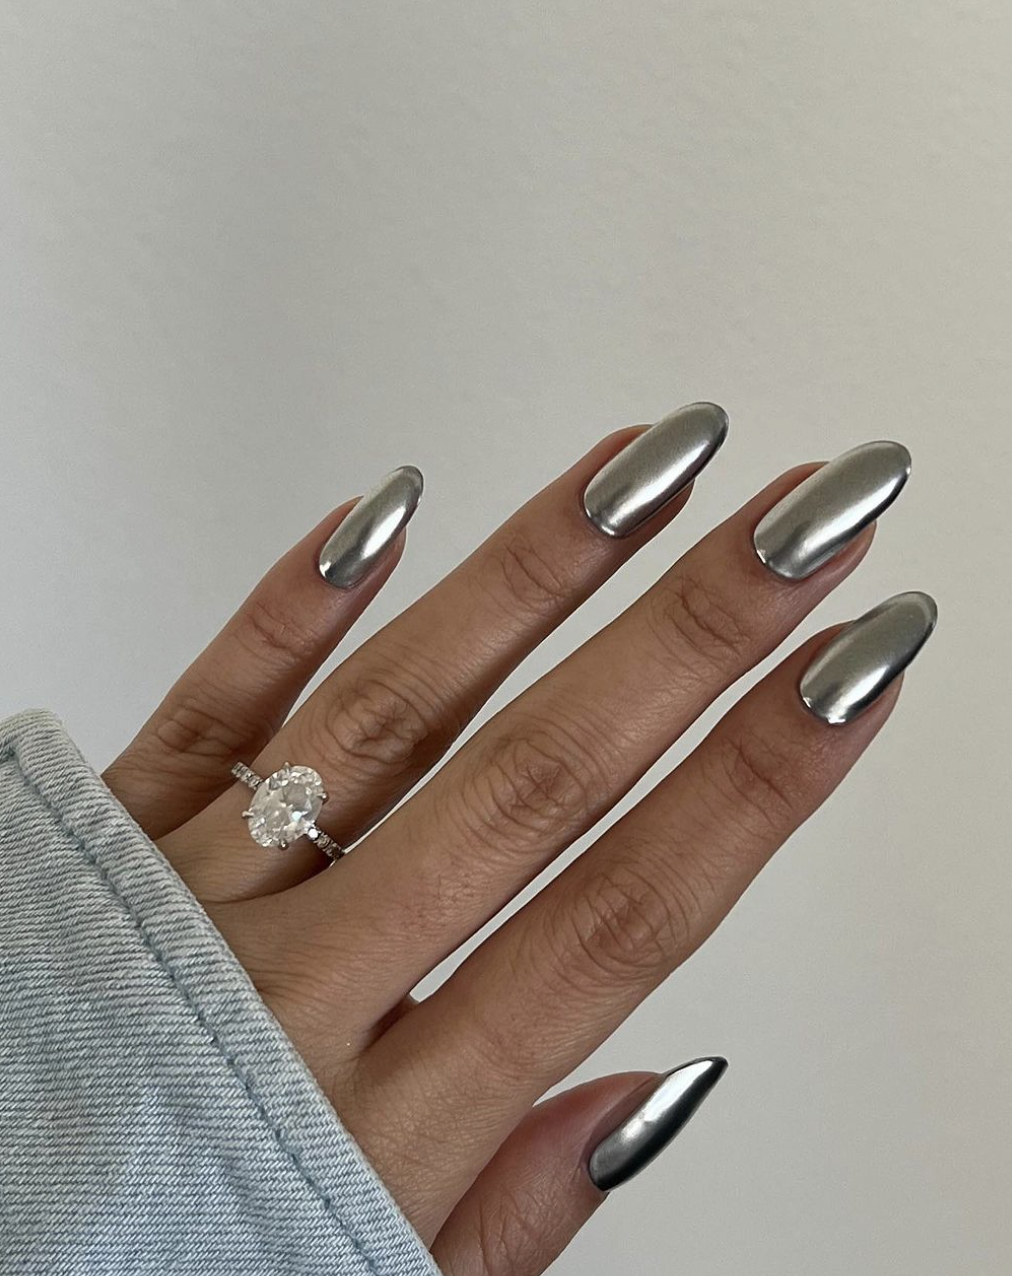 Chrome nails are back in trend.